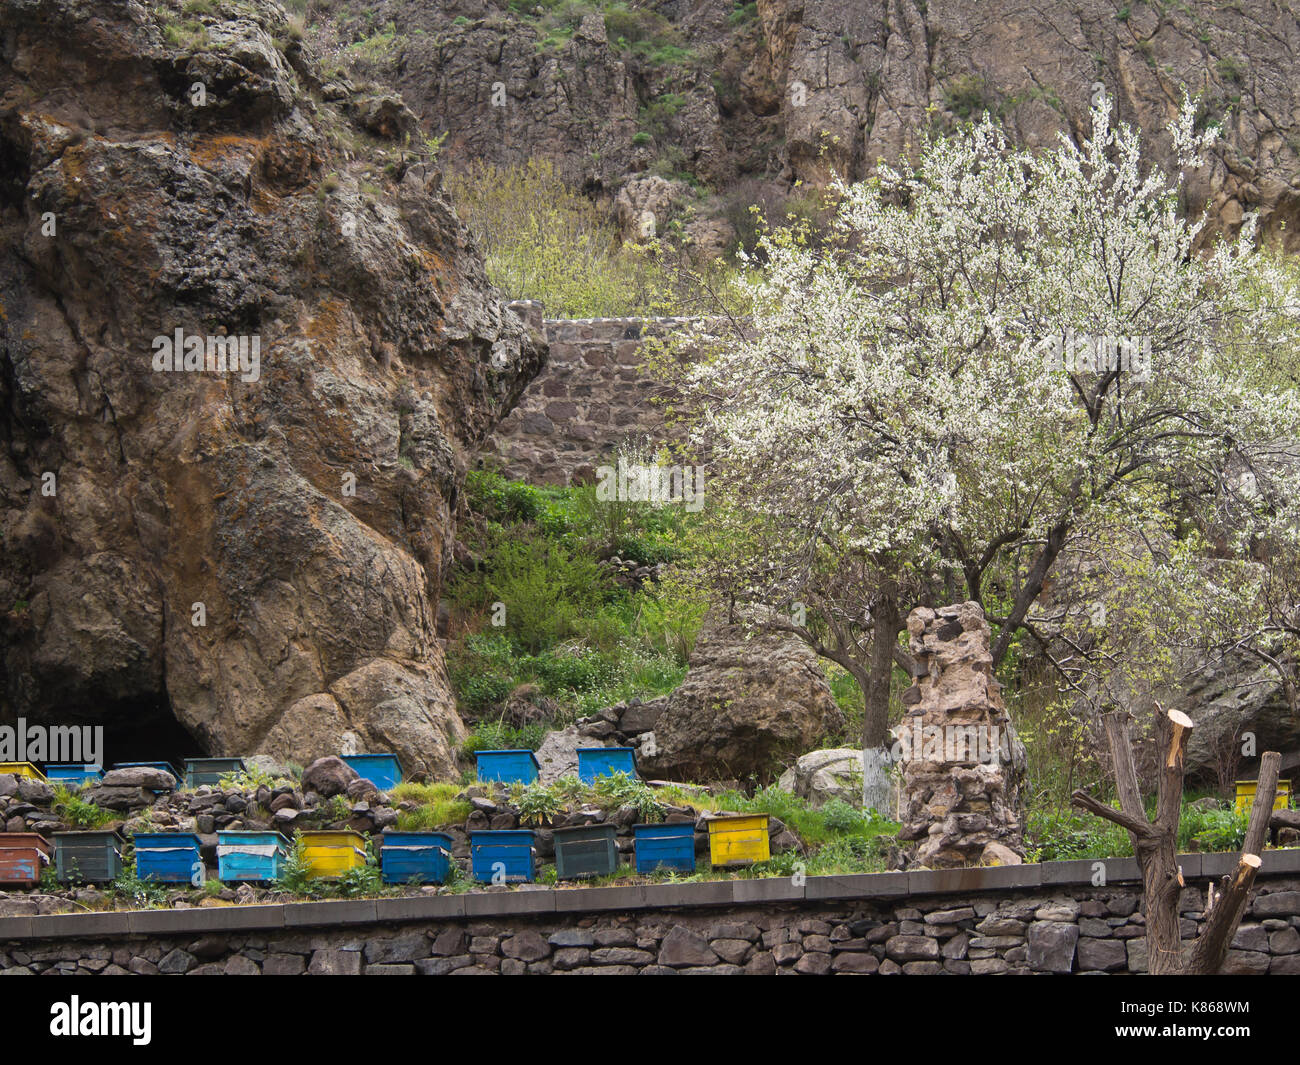 Geghard Monastery in the Azat River gorge, one of several UNESCO World Heritage listed sites in Armenia, beekeeping with trees in the springtime Stock Photo